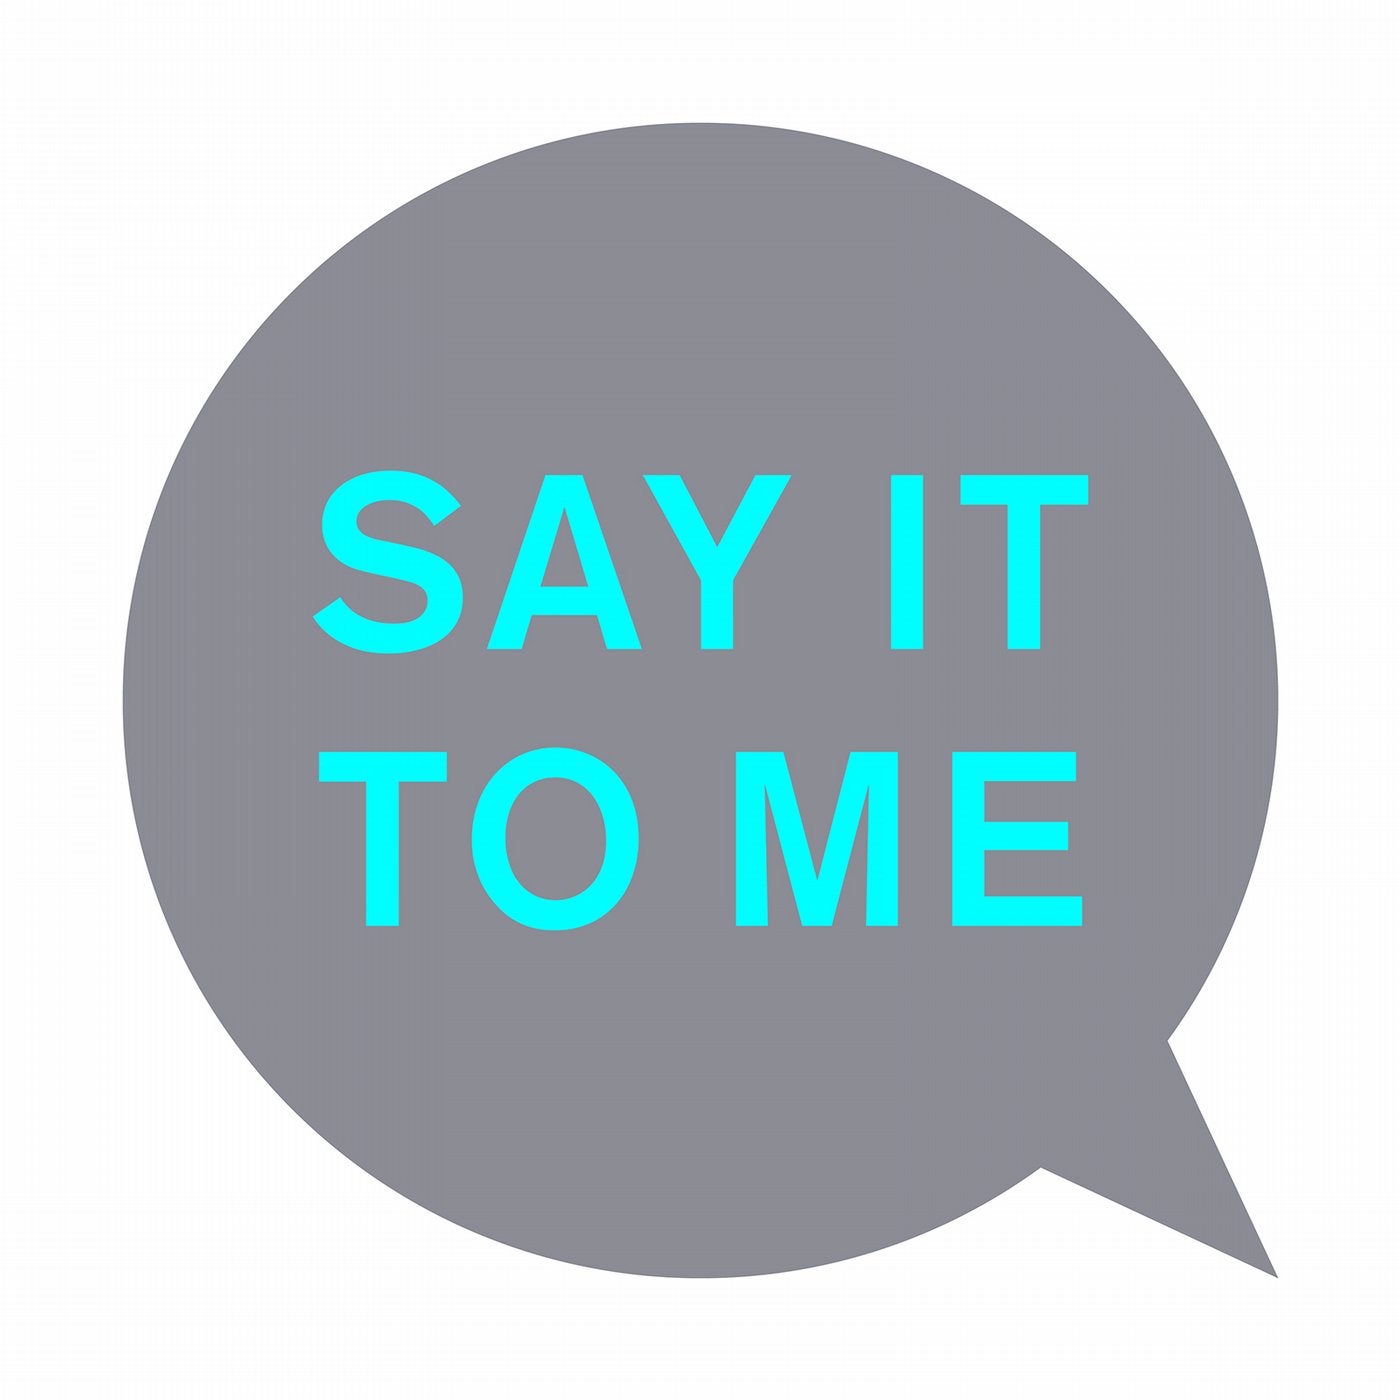 Say it discover. Say картинка. Pet shop boys say it to me Remixes. Say it to. Say what картинка.